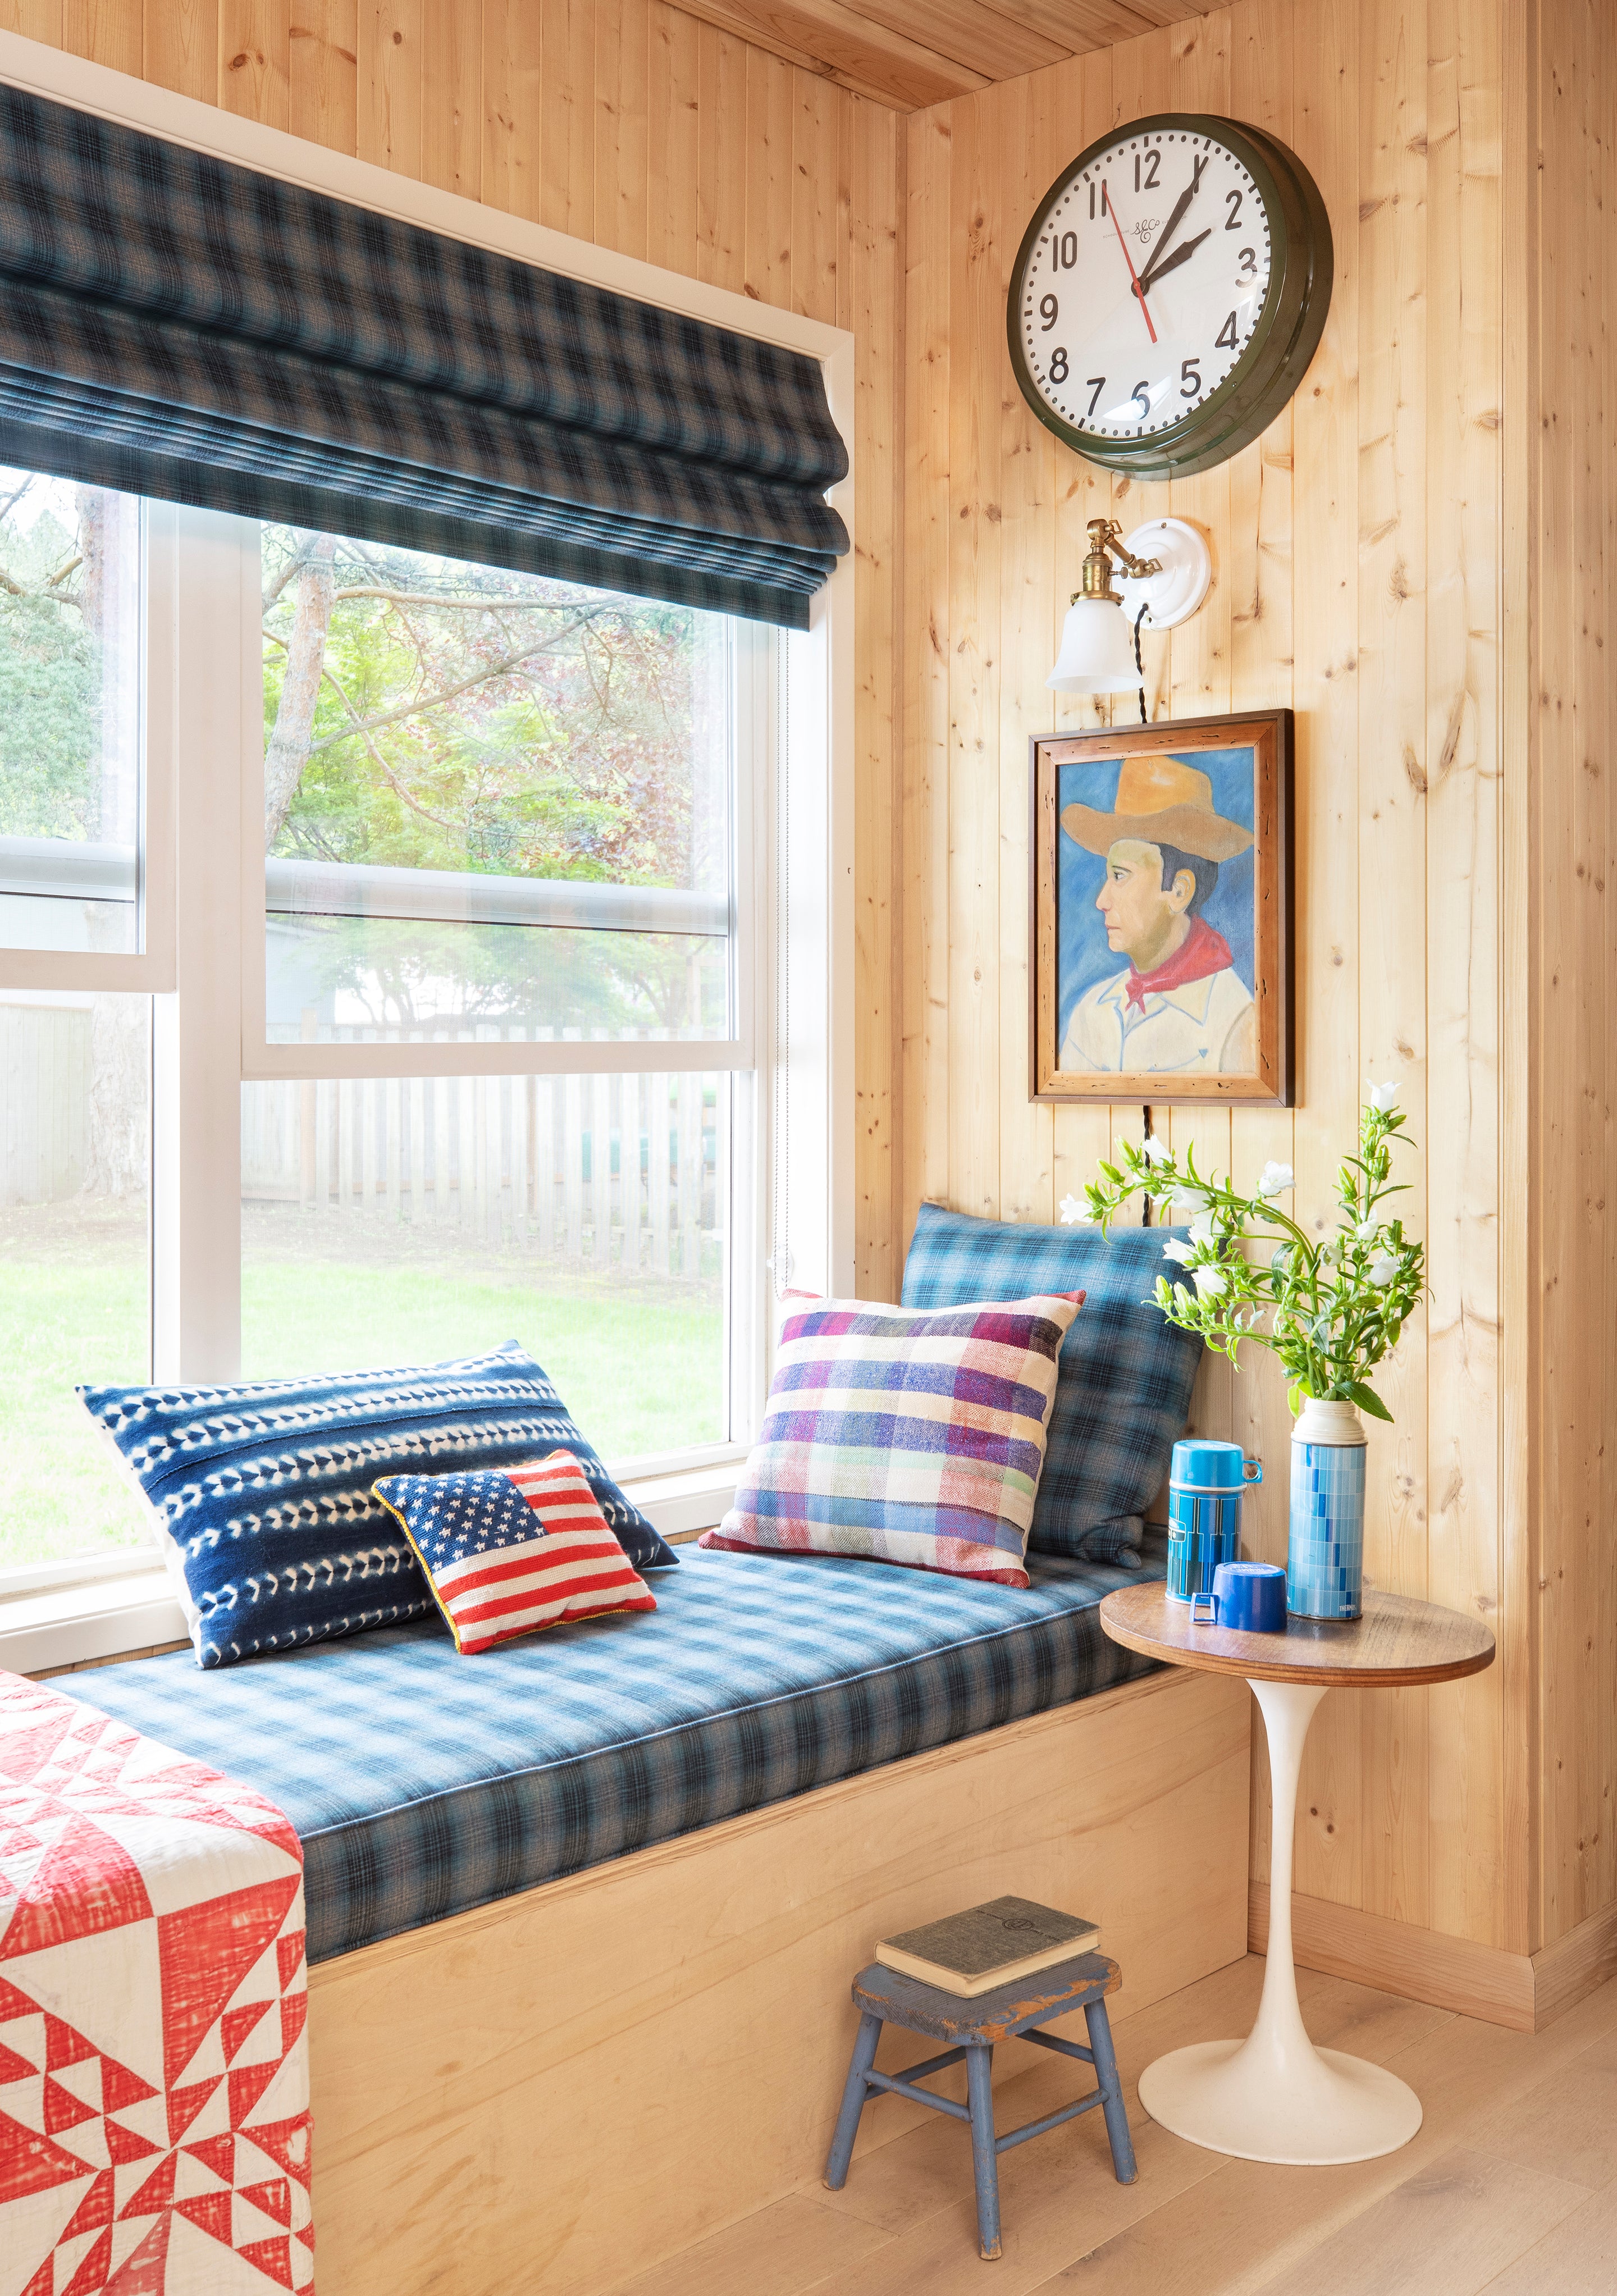 window bench with blue checkered cushions and round table and clock on the wall